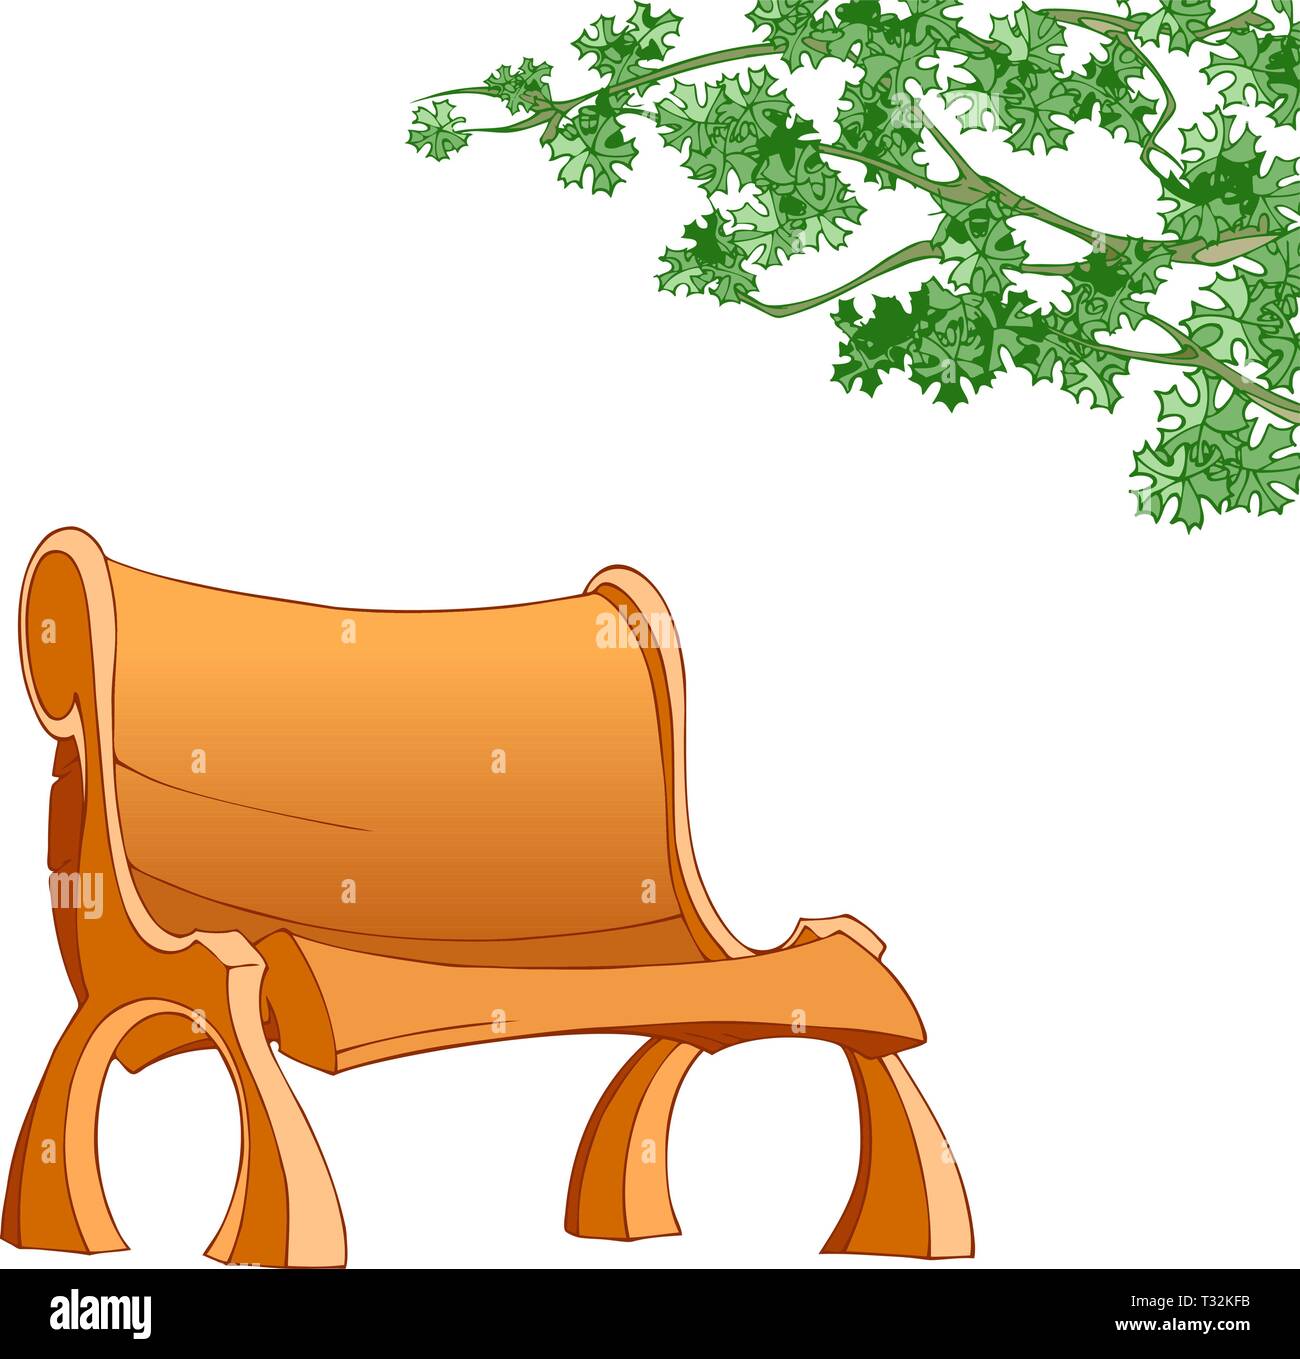 The illustration shows a yellow wooden bench. A tree branch leaning over the bench. Illustration on a white background. Stock Vector